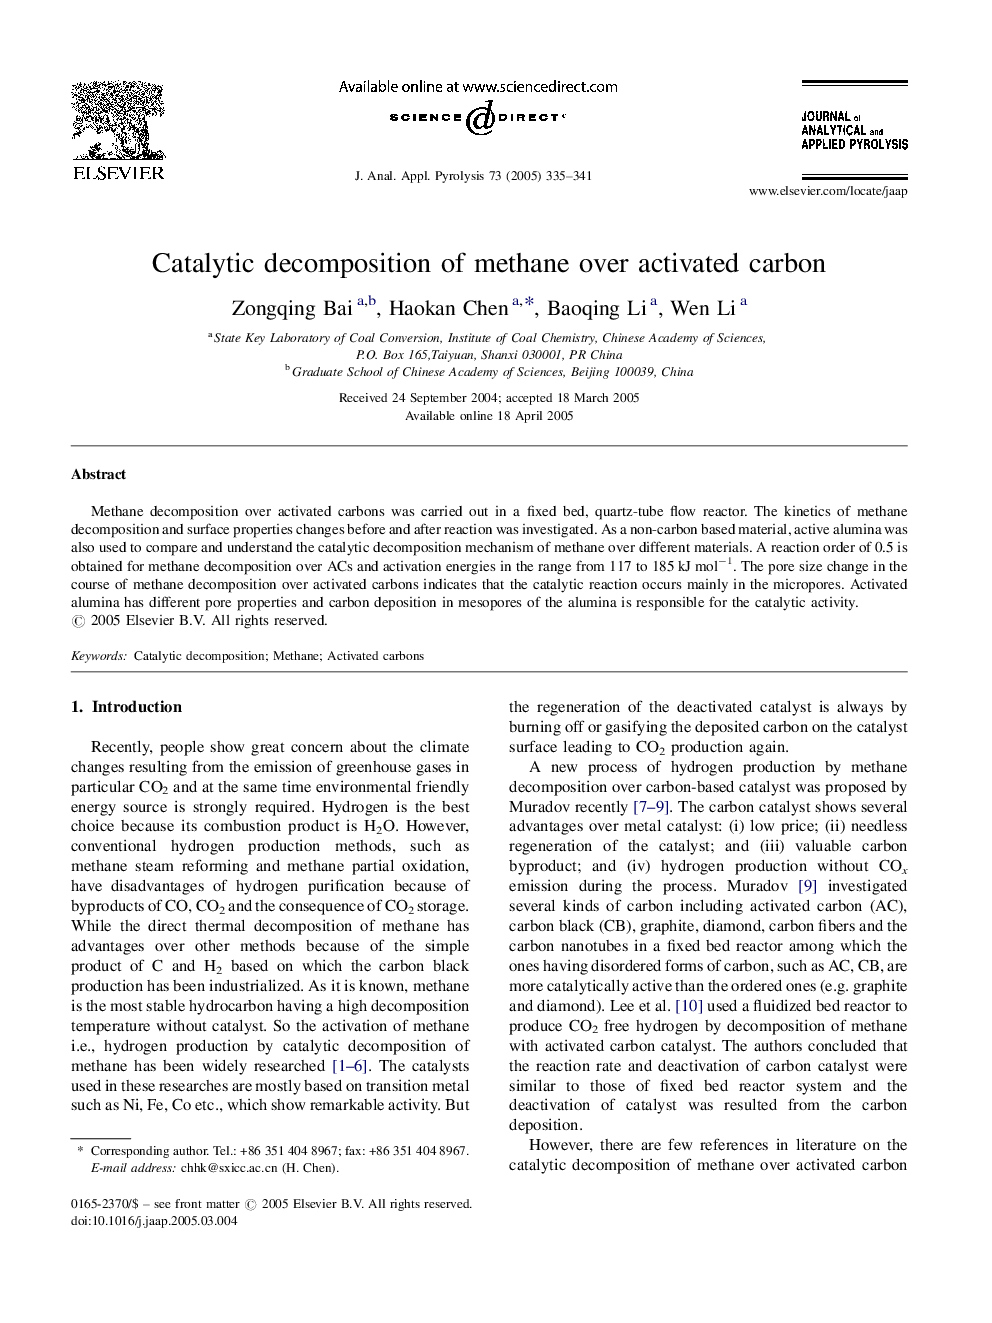 Catalytic decomposition of methane over activated carbon